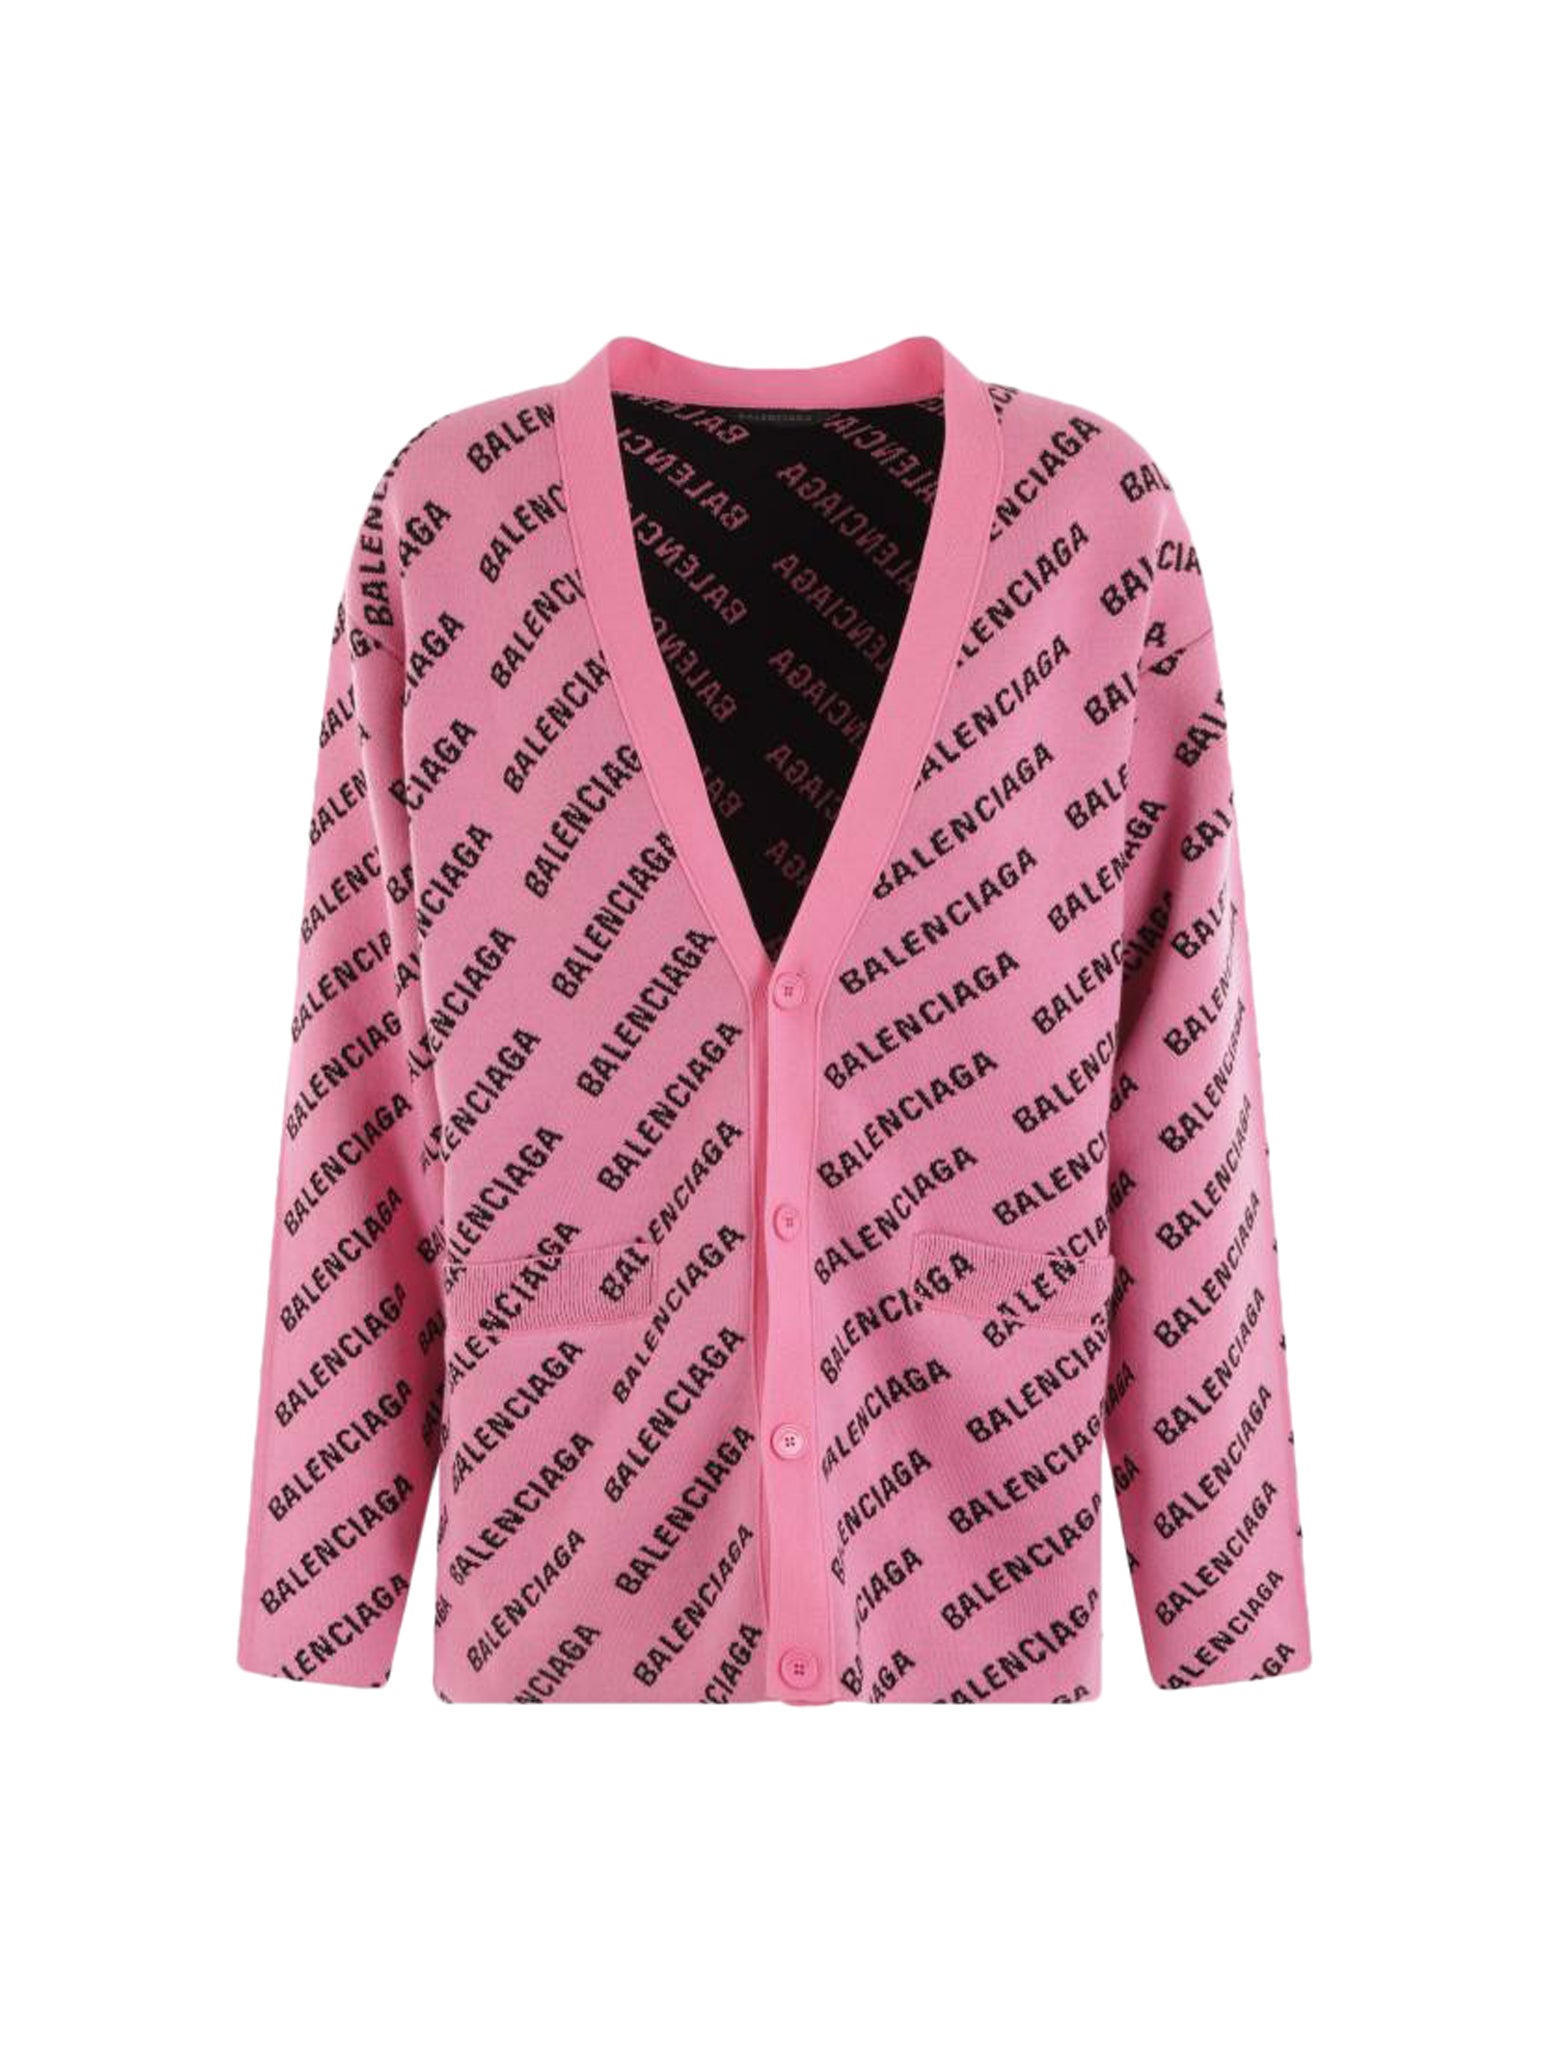 CARDIGAN IN COTTON BLEND WITH LETTERING LOGO